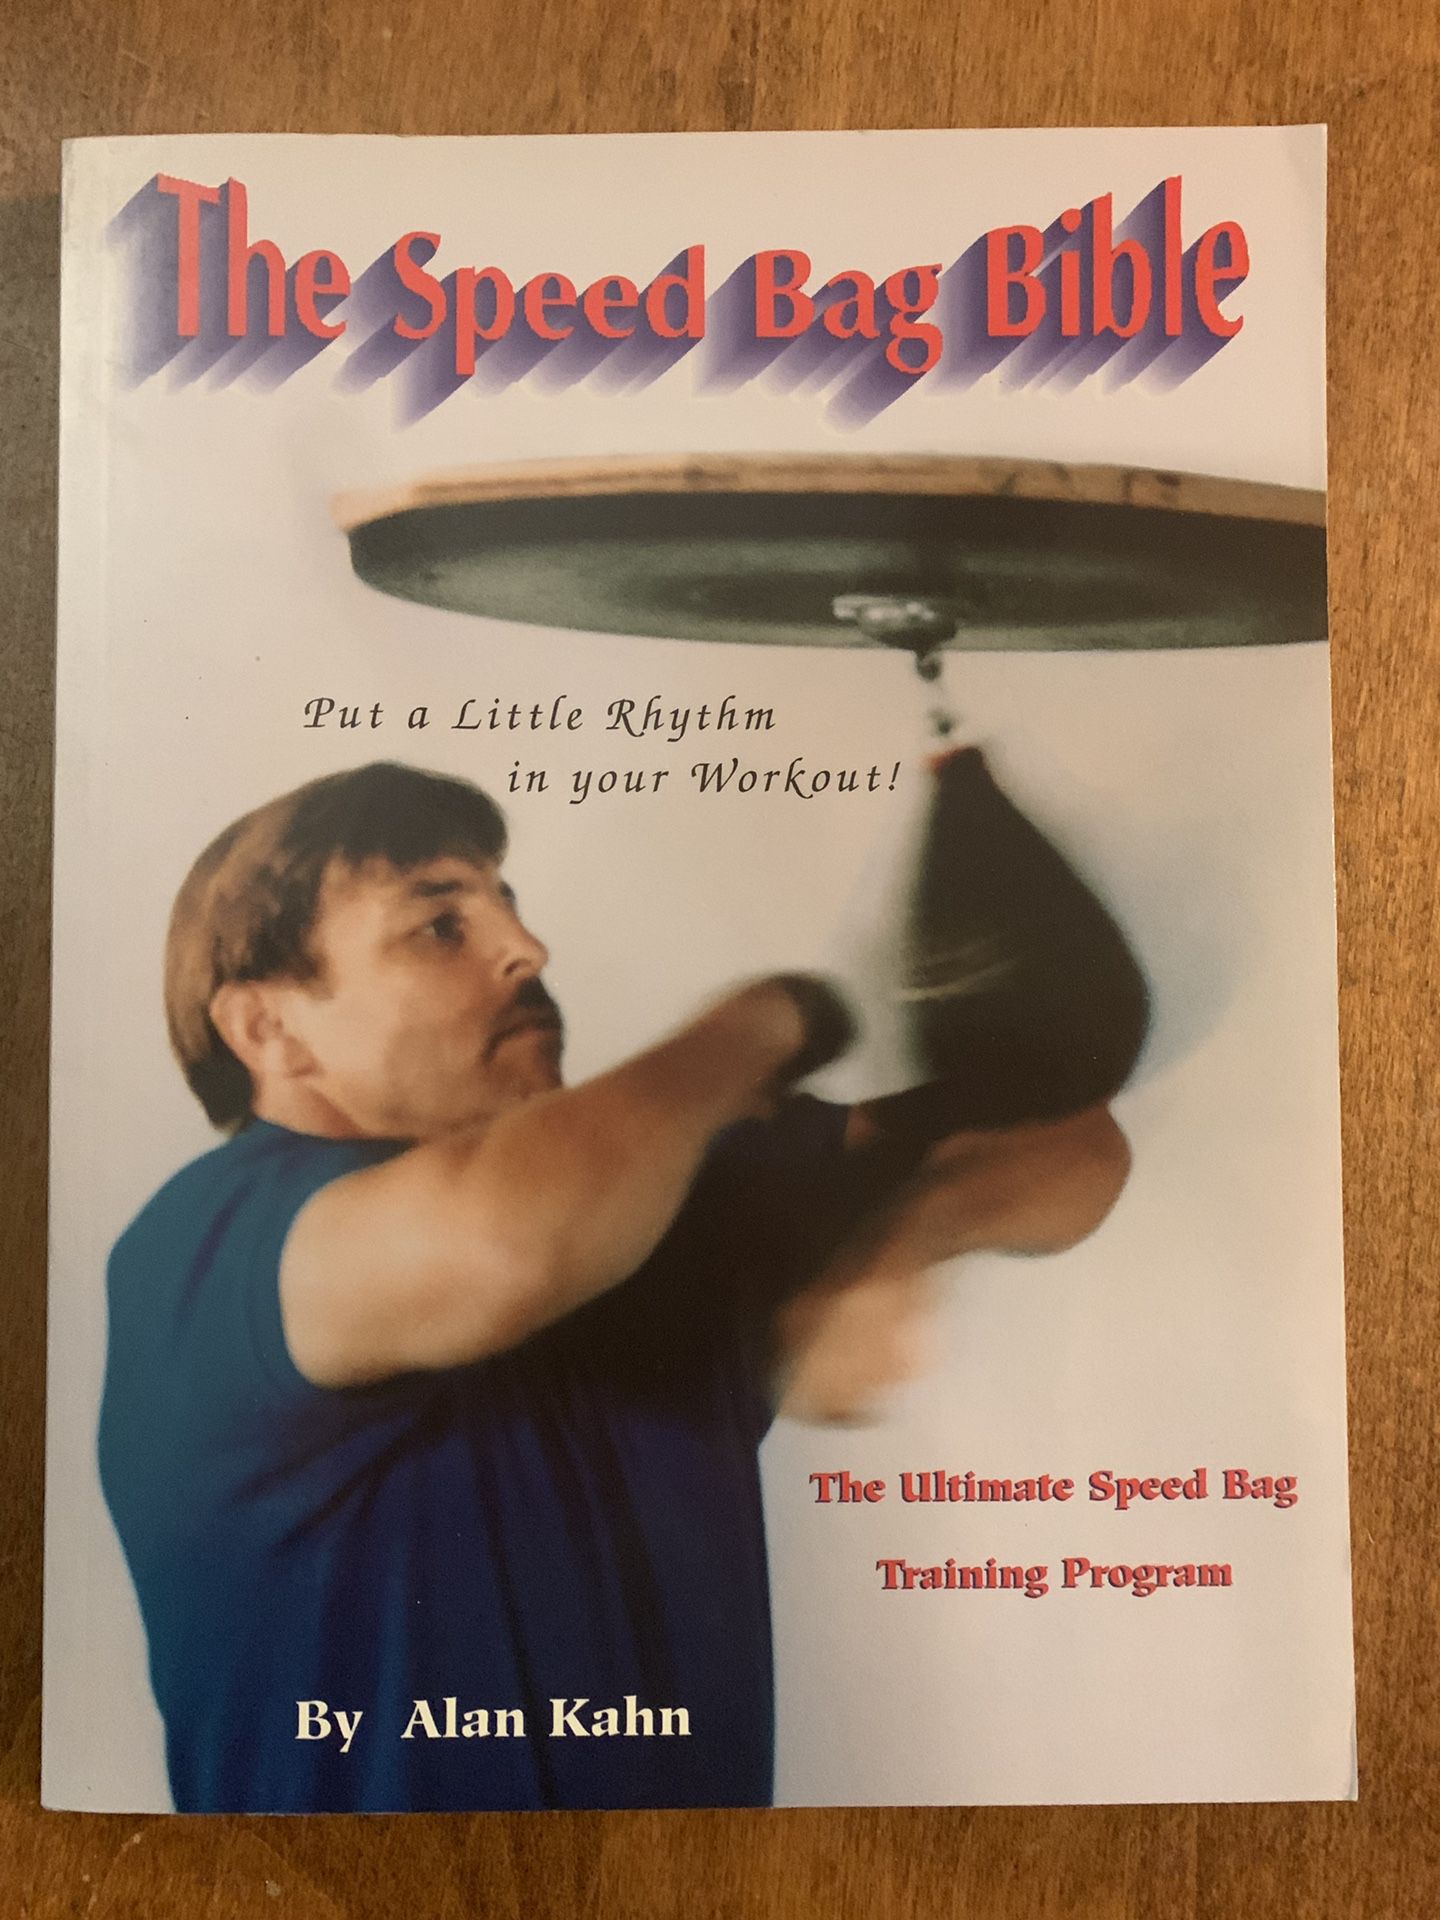 Book: The Speed Bag Bible